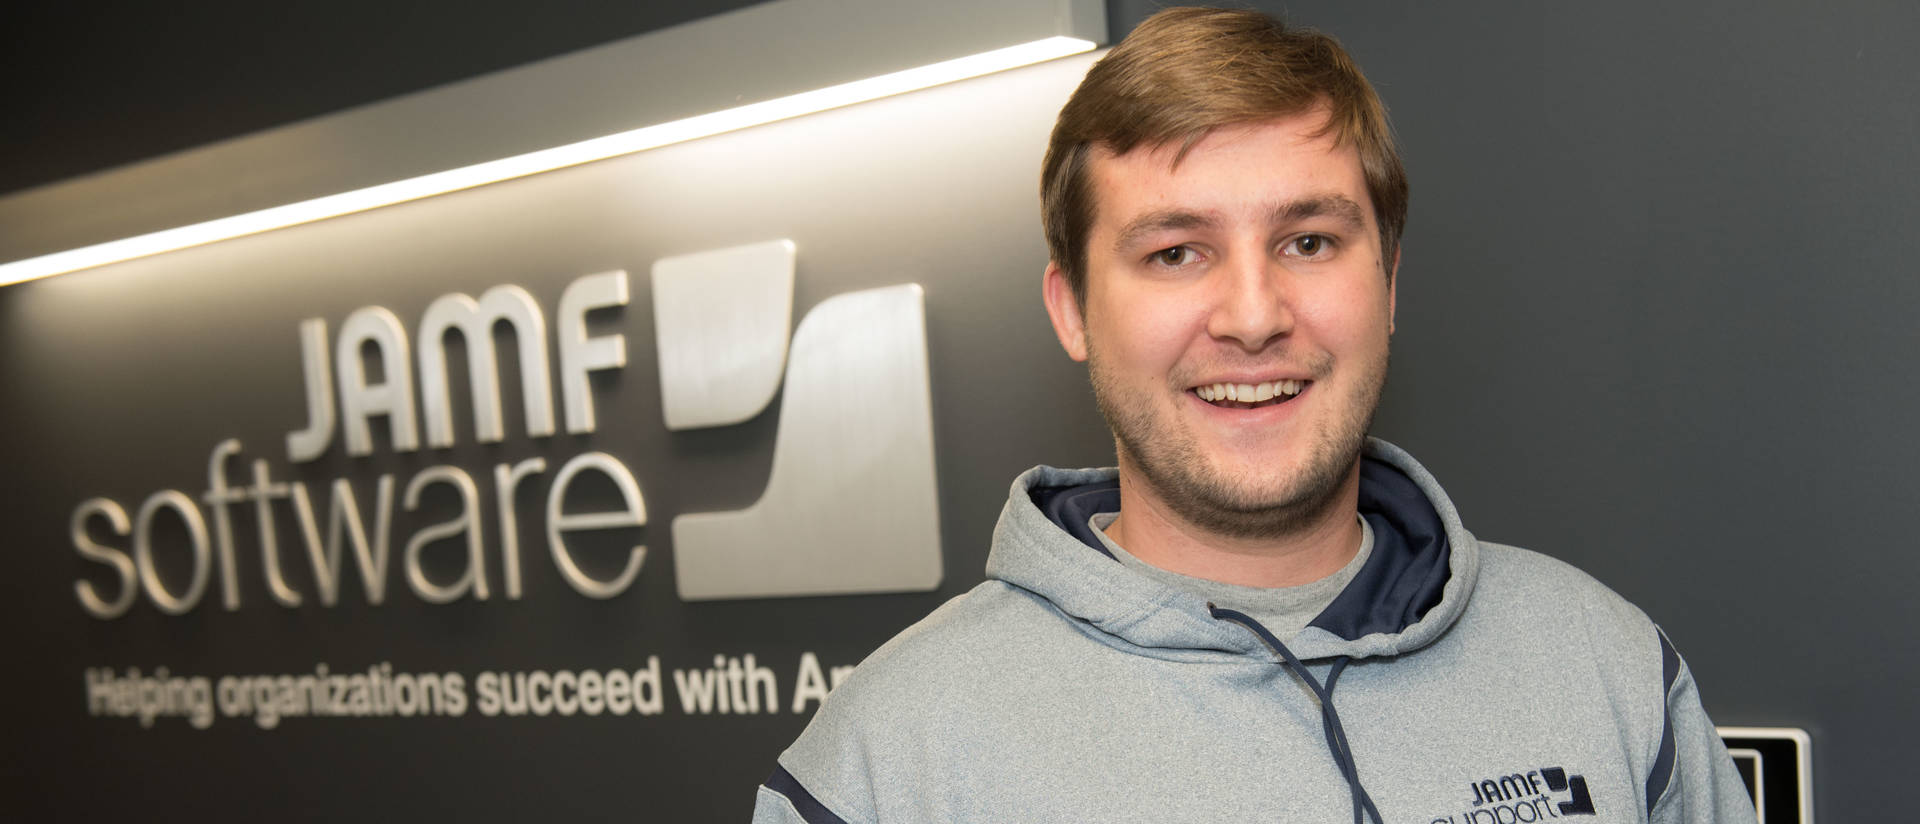 UW-Eau Claire alumnus Christian Dooley at his employer, JAMF Software